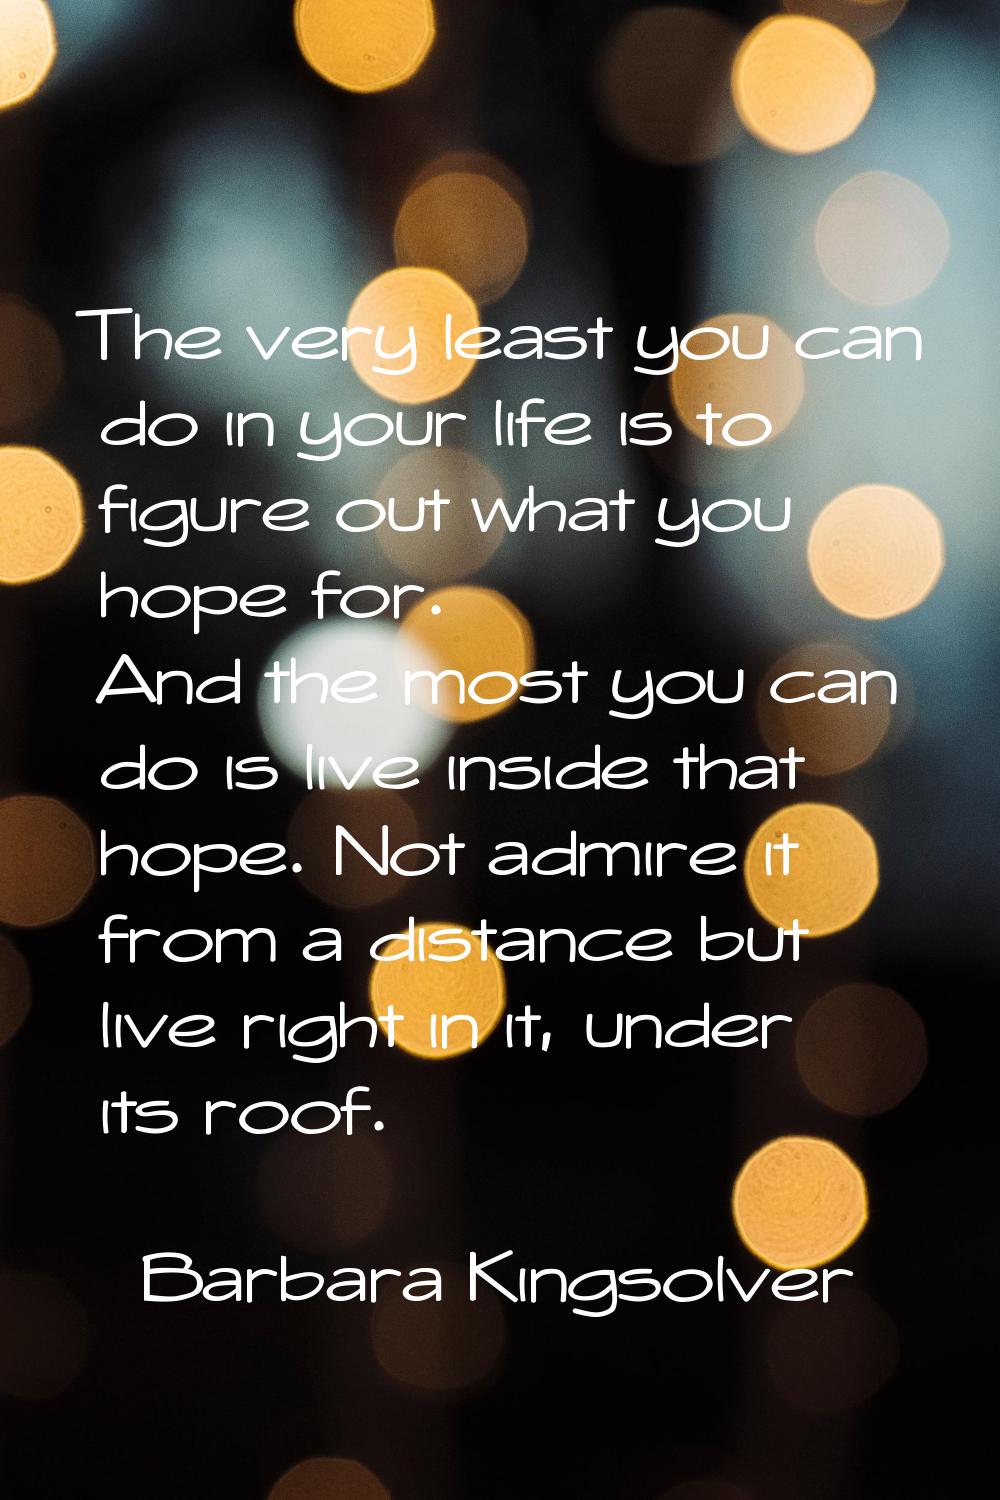 The very least you can do in your life is to figure out what you hope for. And the most you can do 